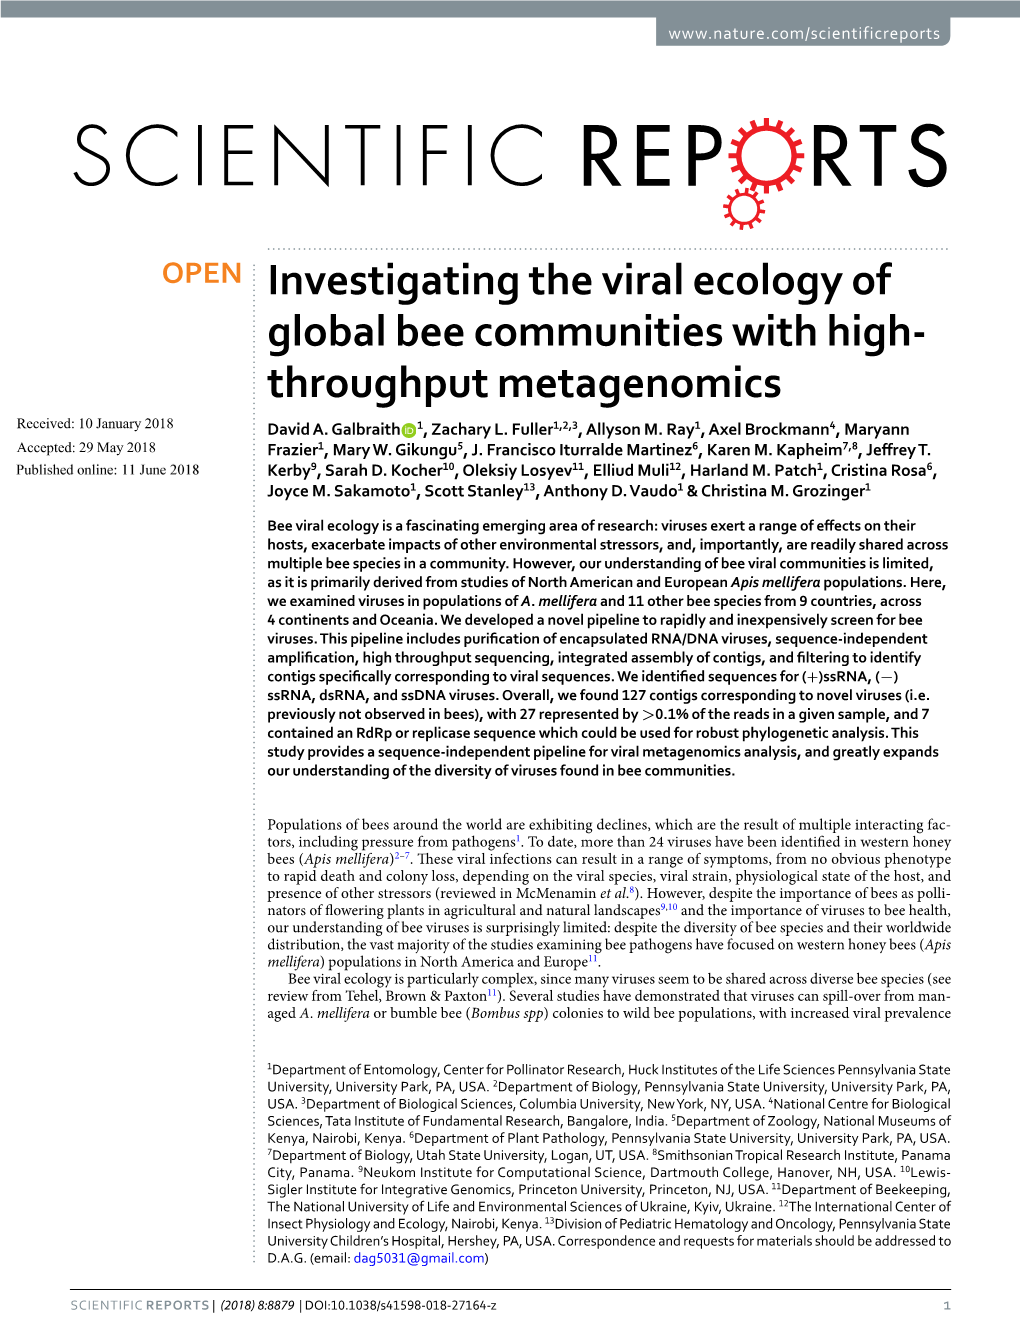 Investigating the Viral Ecology of Global Bee Communities with High- Throughput Metagenomics Received: 10 January 2018 David A